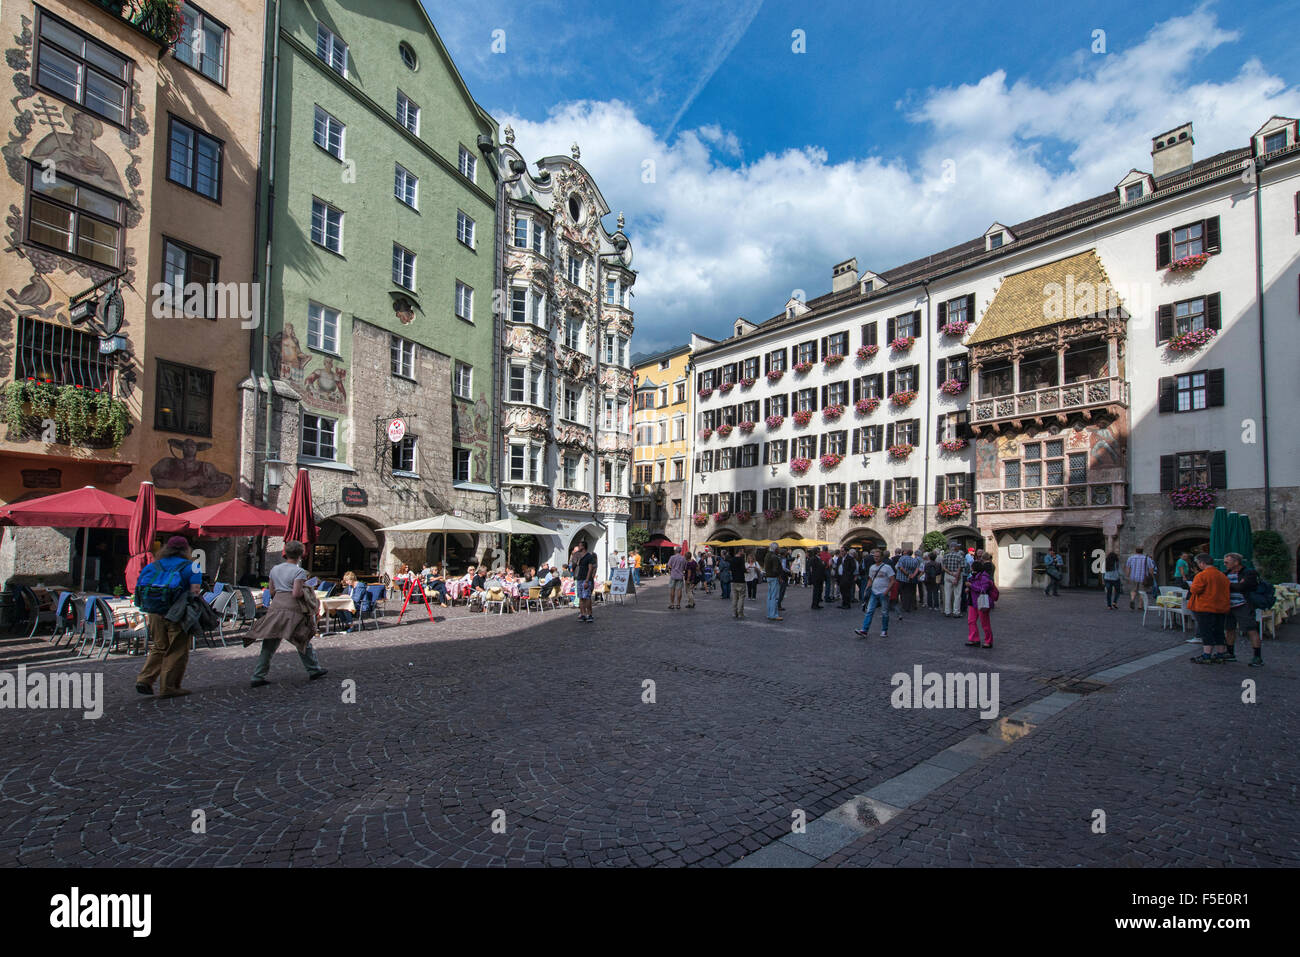 The beautiful Helblinghaus (Casa Helbling), Goldenes Dachl, and other Baroque and Gothic buildings in the Old Town of Innsbruck, Stock Photo